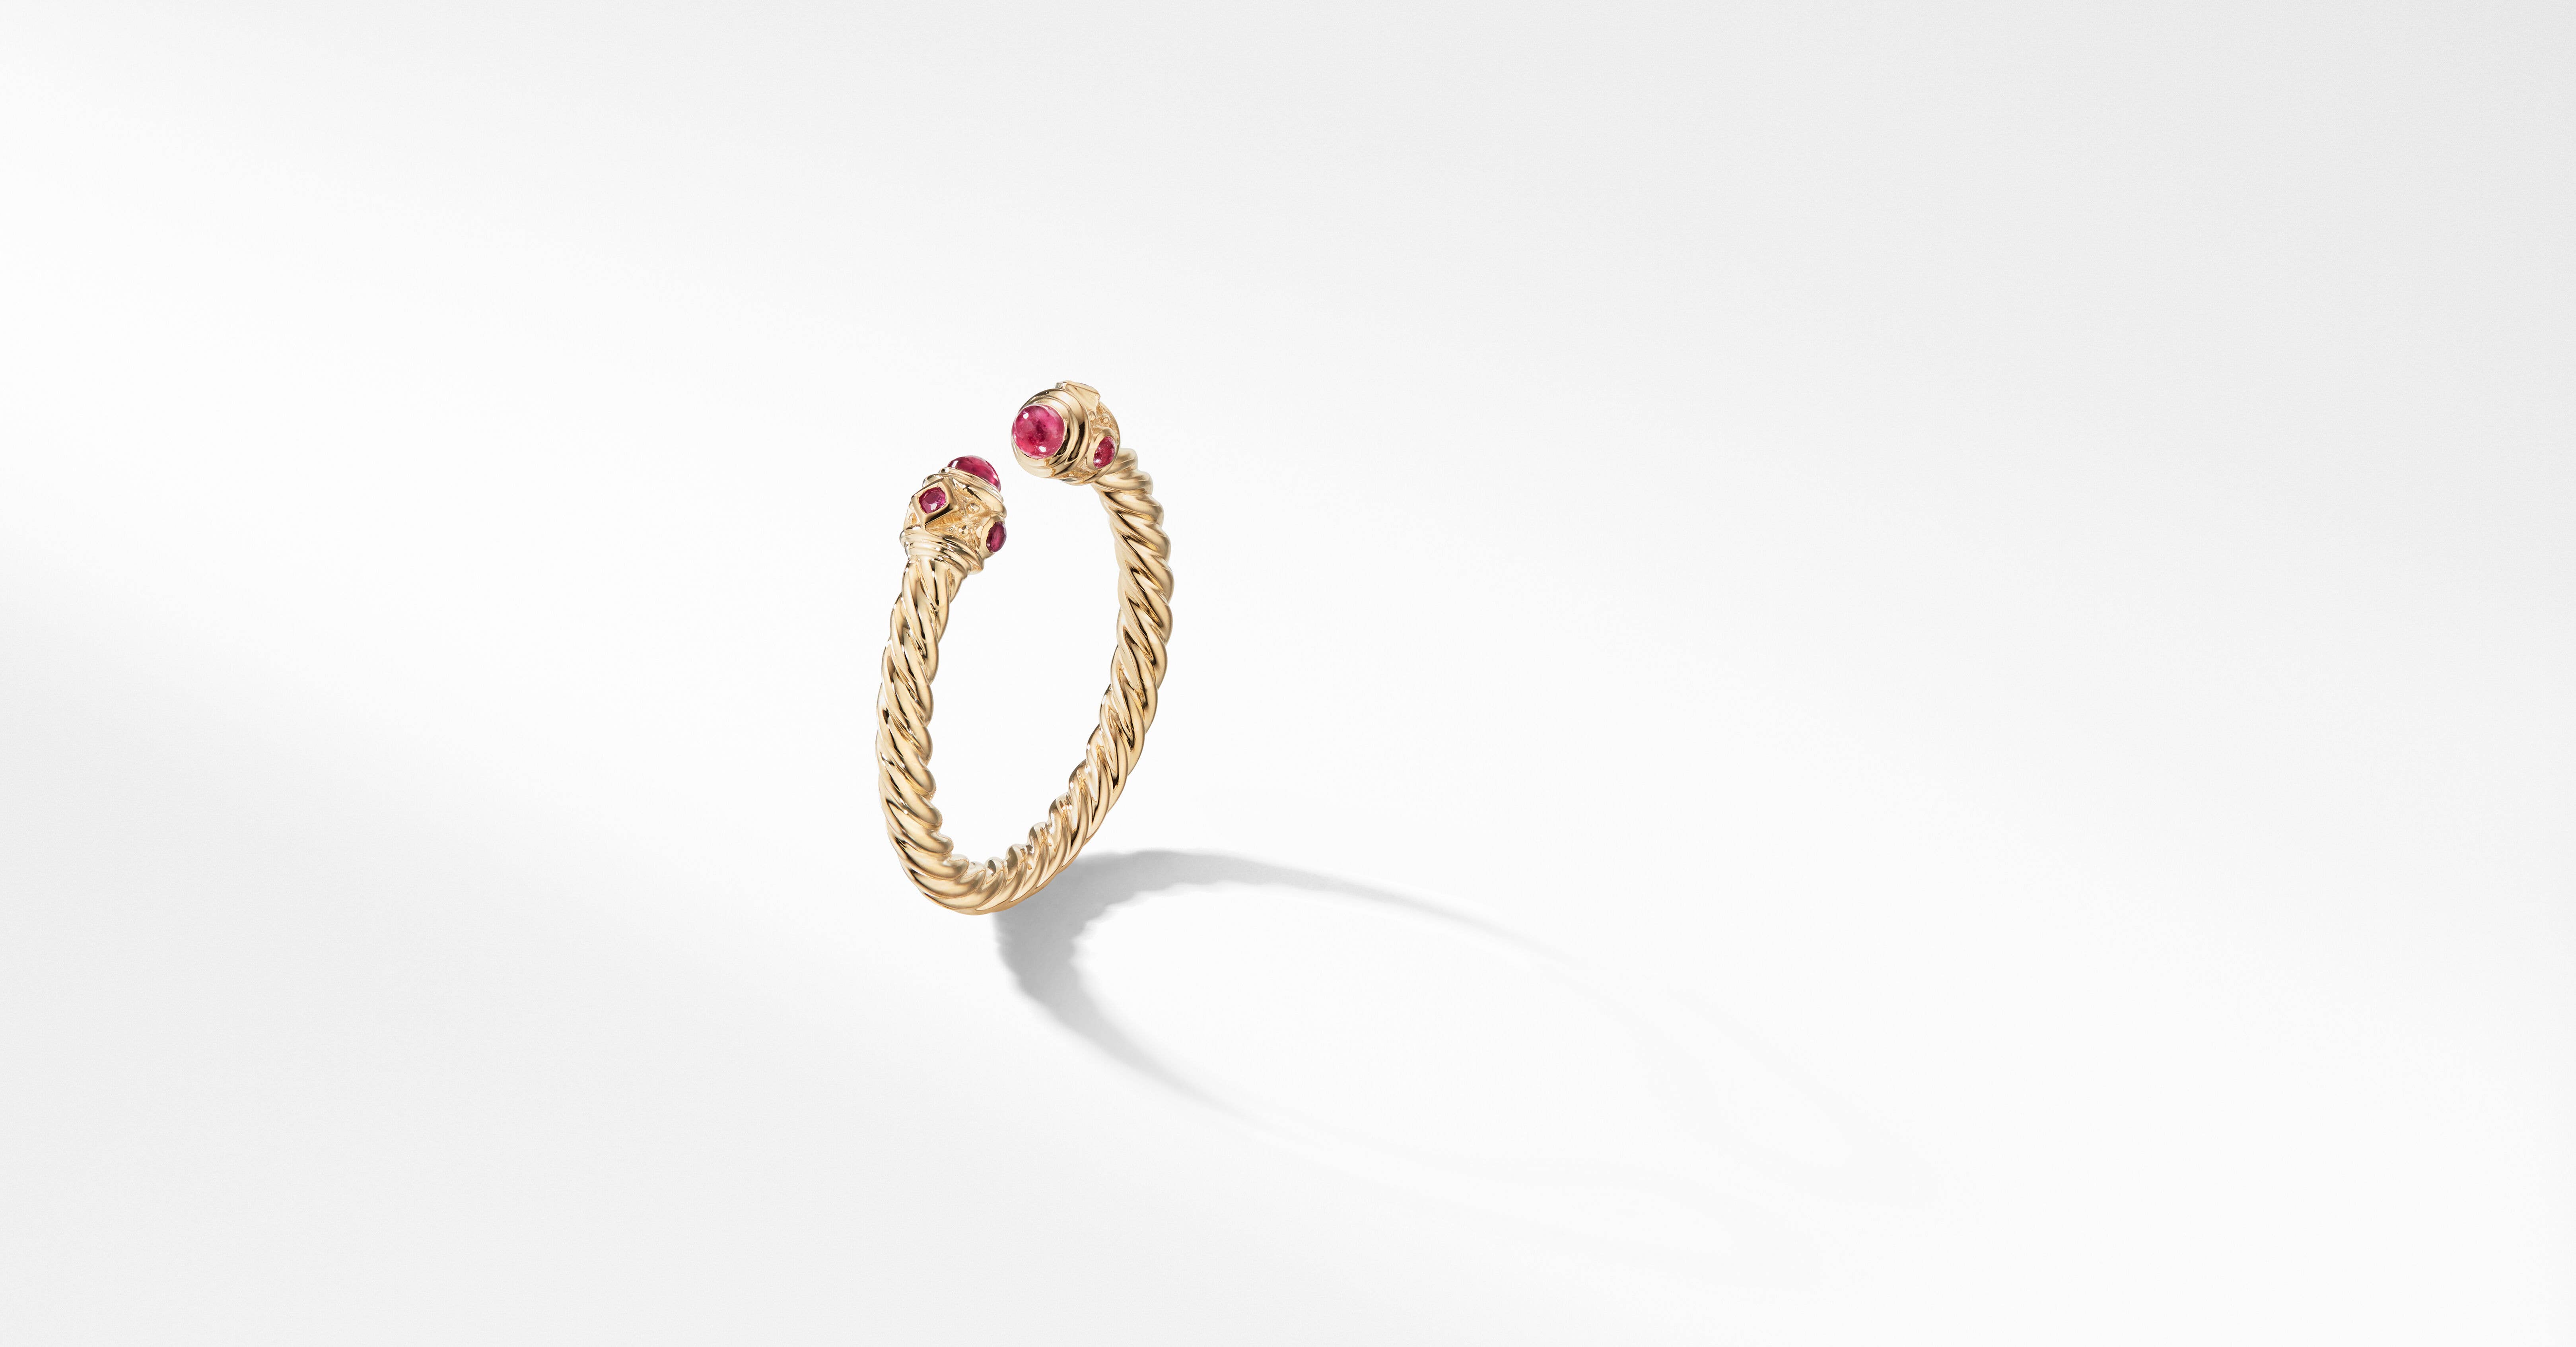 Renaissance Color Ring in 18K Yellow Gold with Rubies | David Yurman